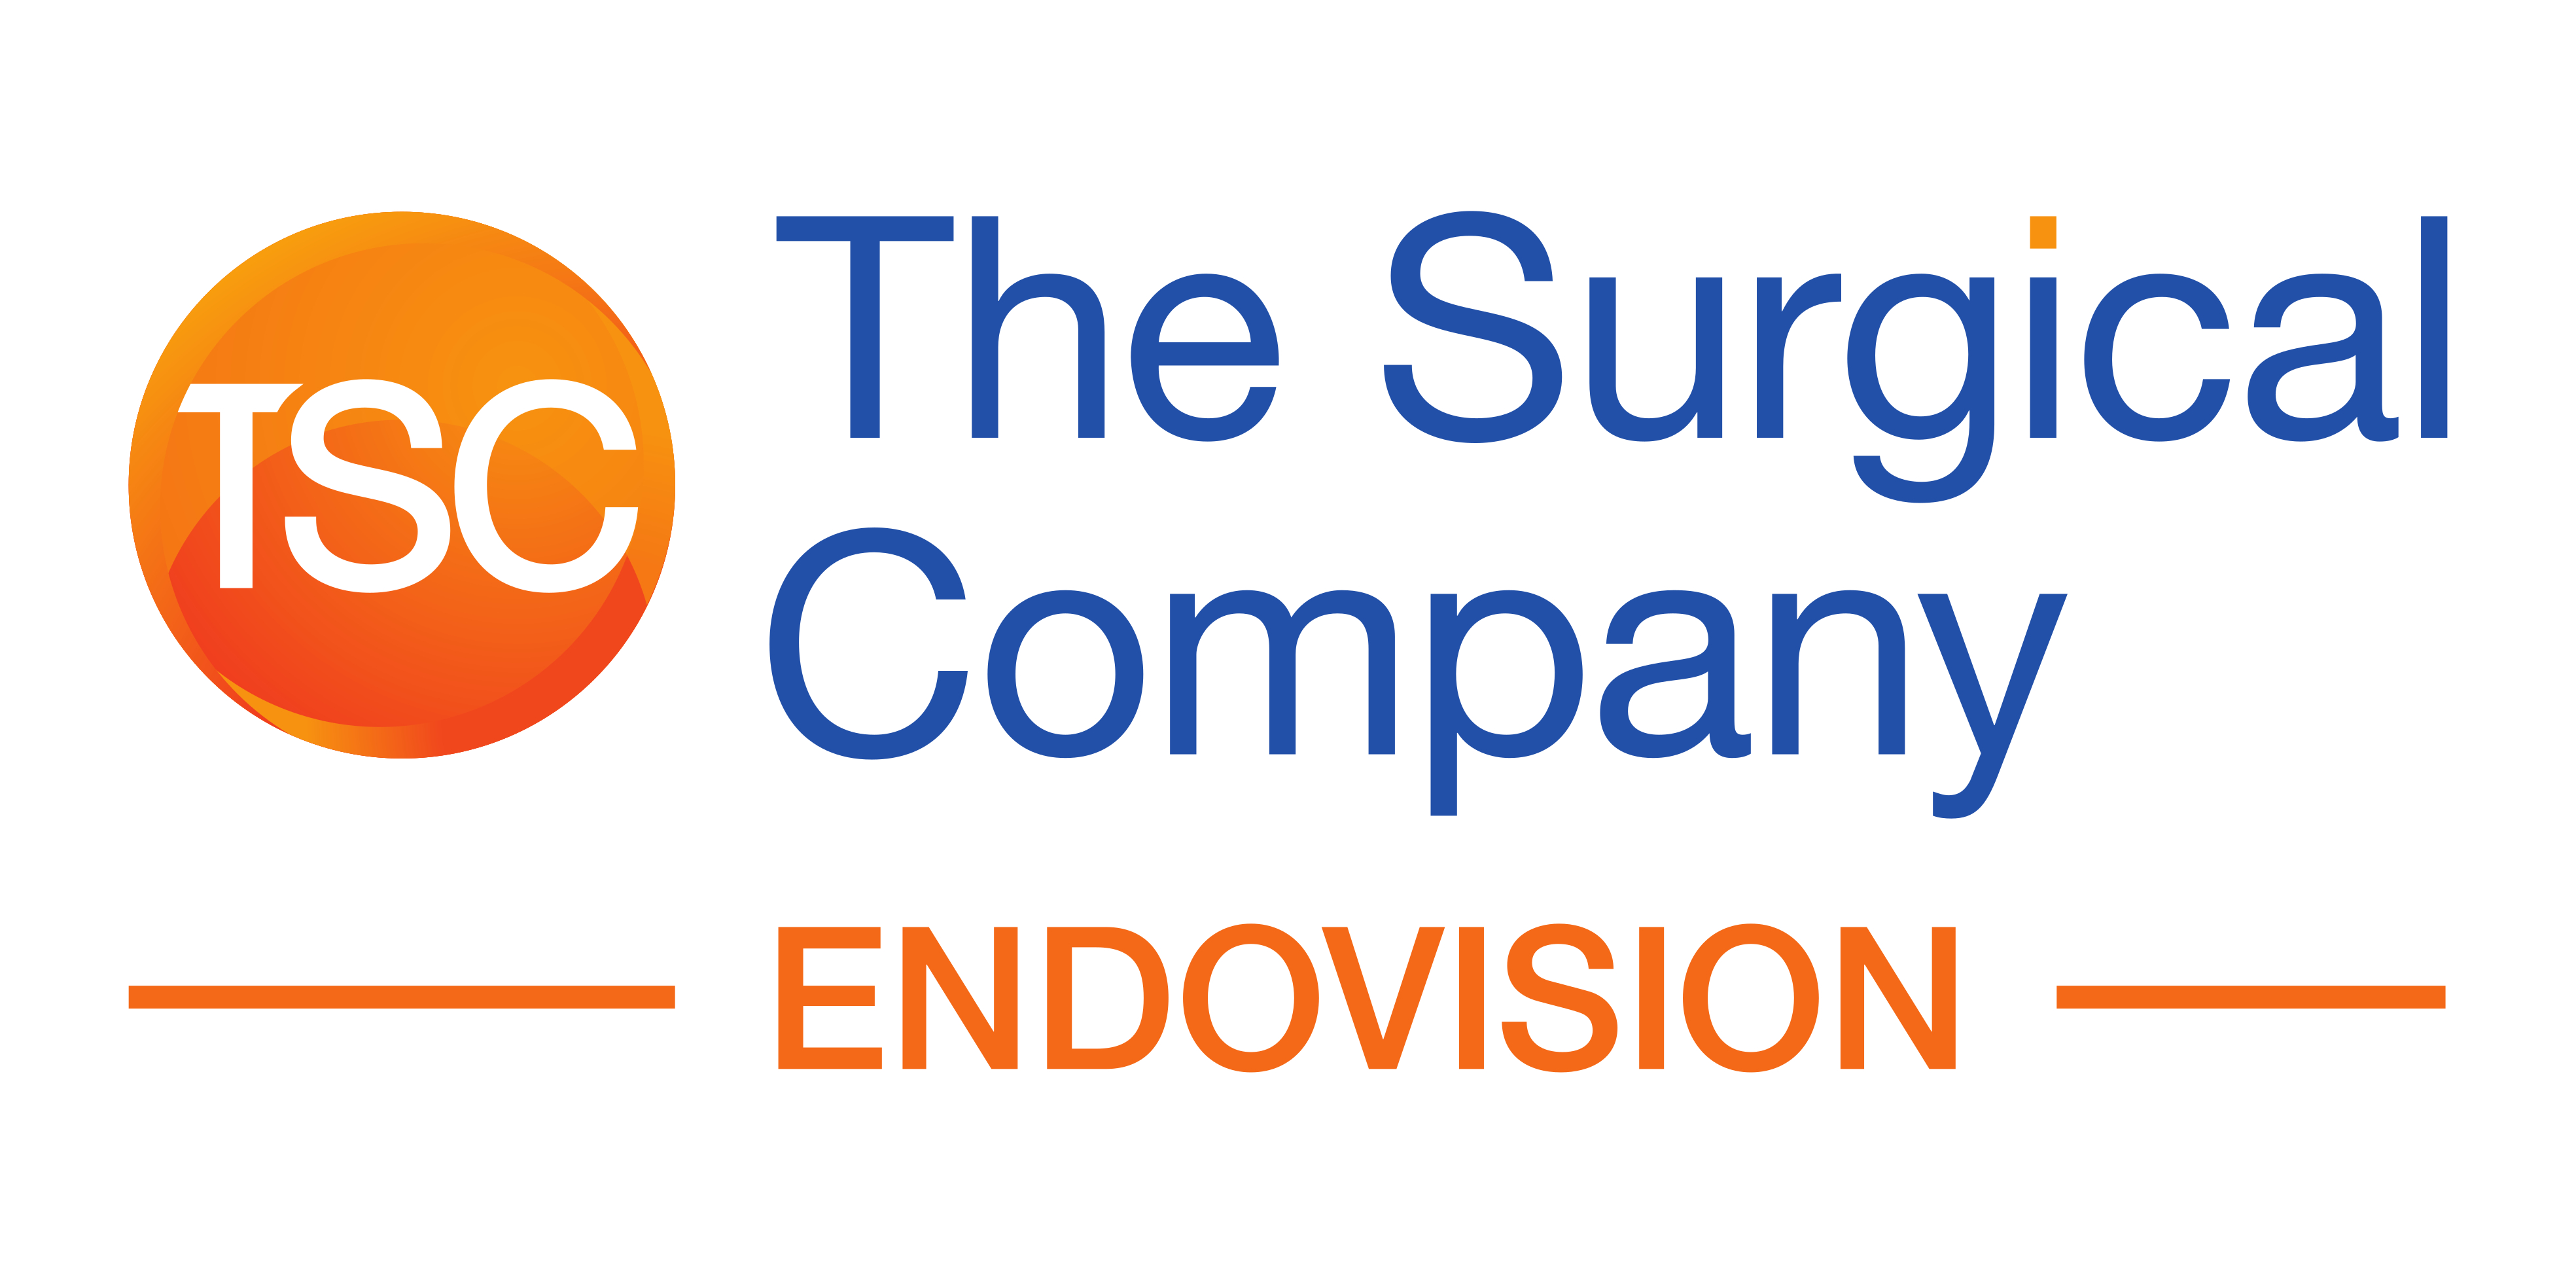 The Surgical Company_FC_ENDOVISION